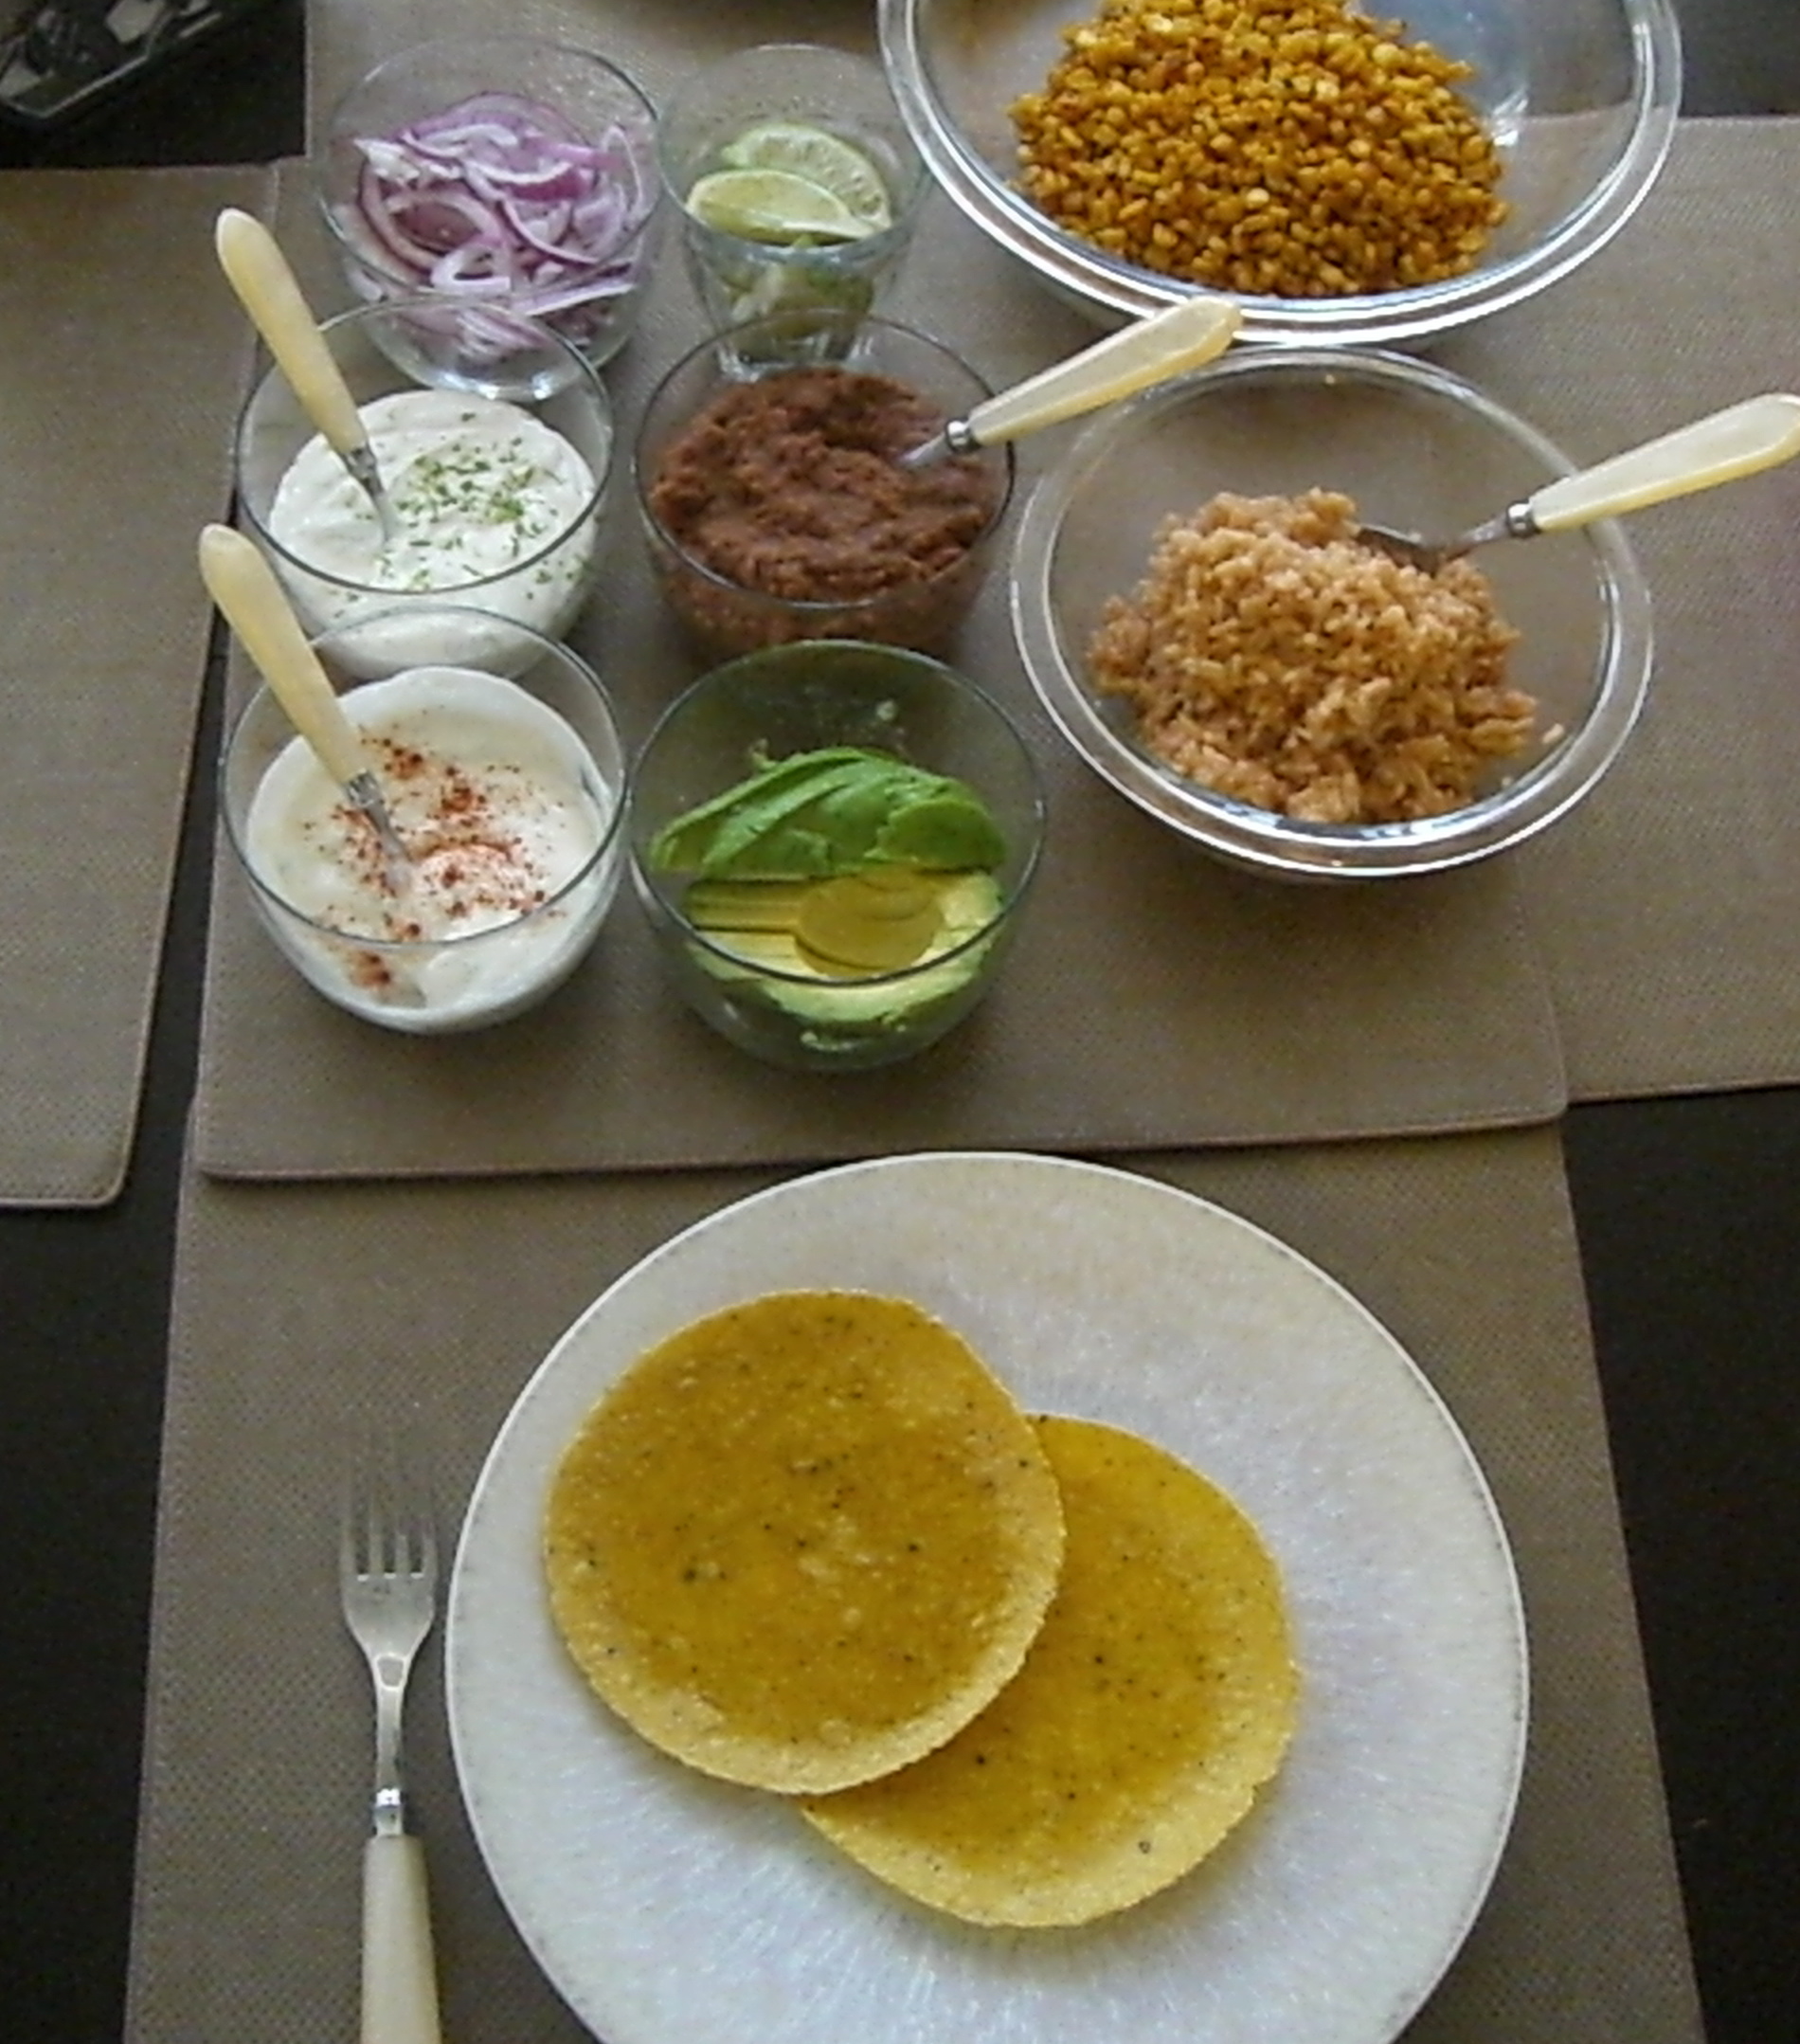 Look at all the makings of this vegan taco dinner!